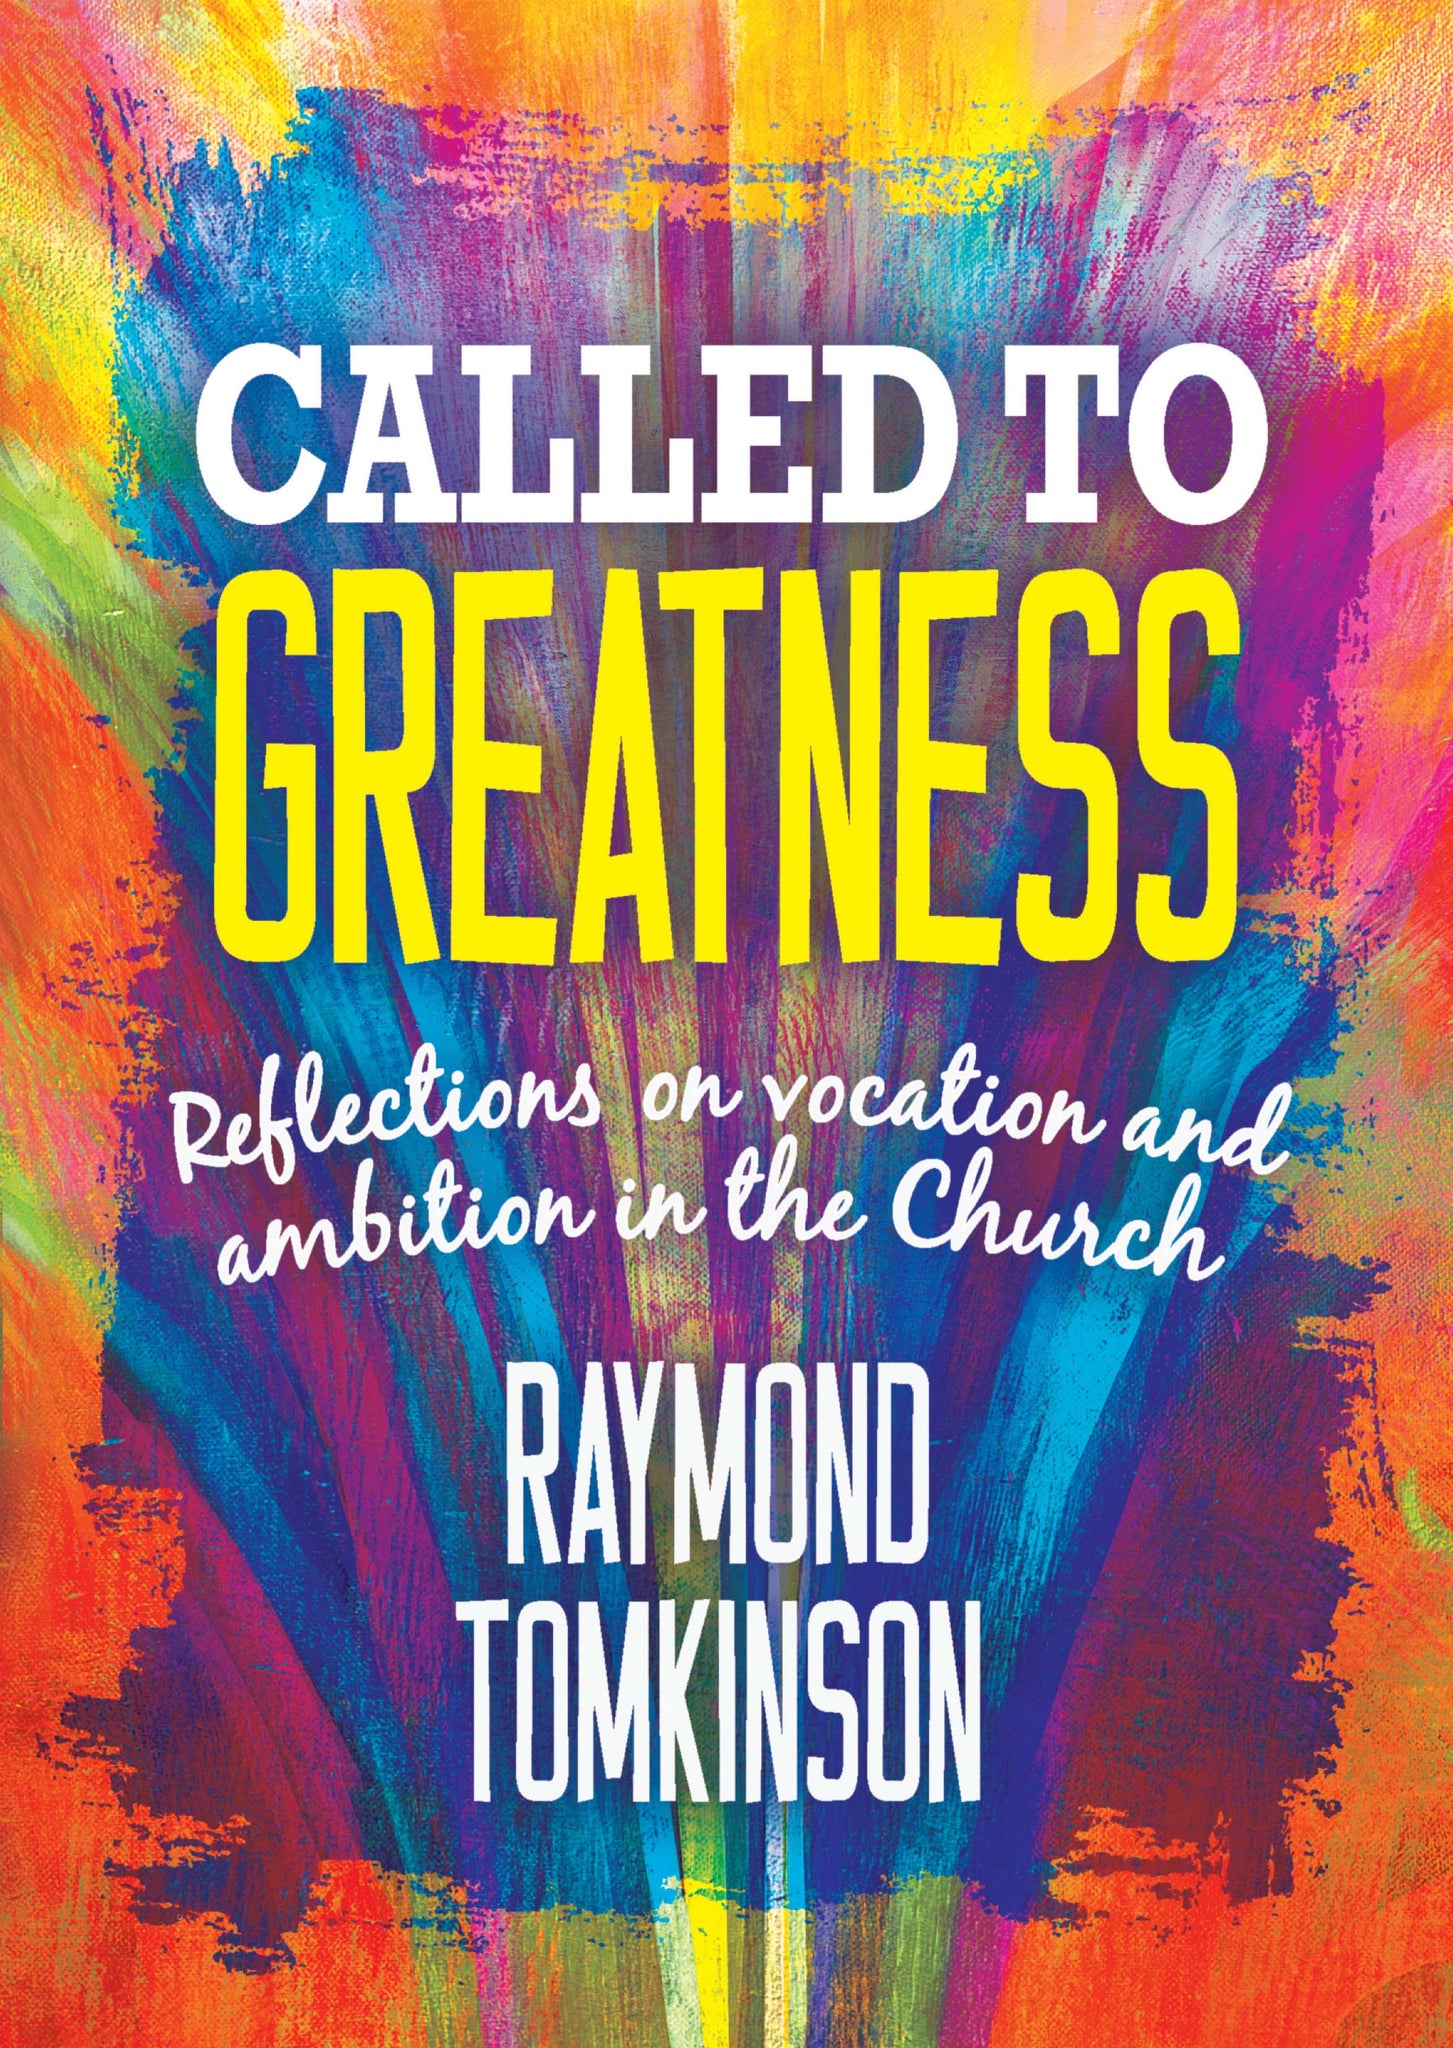 Called To GreatnessCalled To Greatness